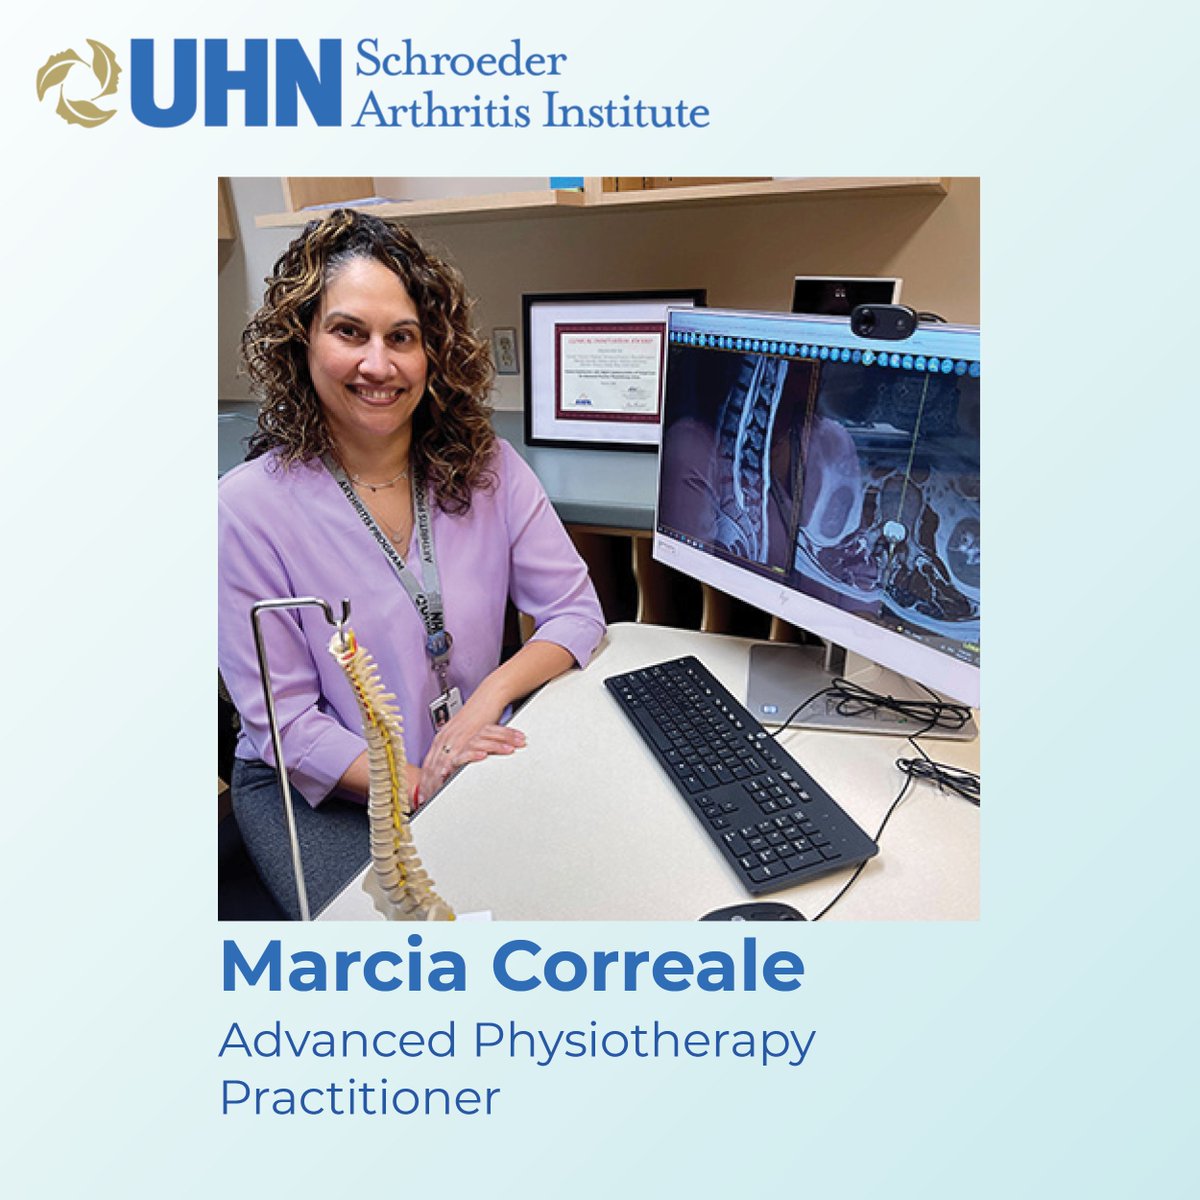 May is #NationalPhysiotherapyMonth! Meet Marcia Correale, Advanced Physiotherapy Practitioner @SchroederInst. She uses a ‘personalized approach to care’ rooted in evidence-based research to help patients in their journey towards recovery → bit.ly/3vNUW88